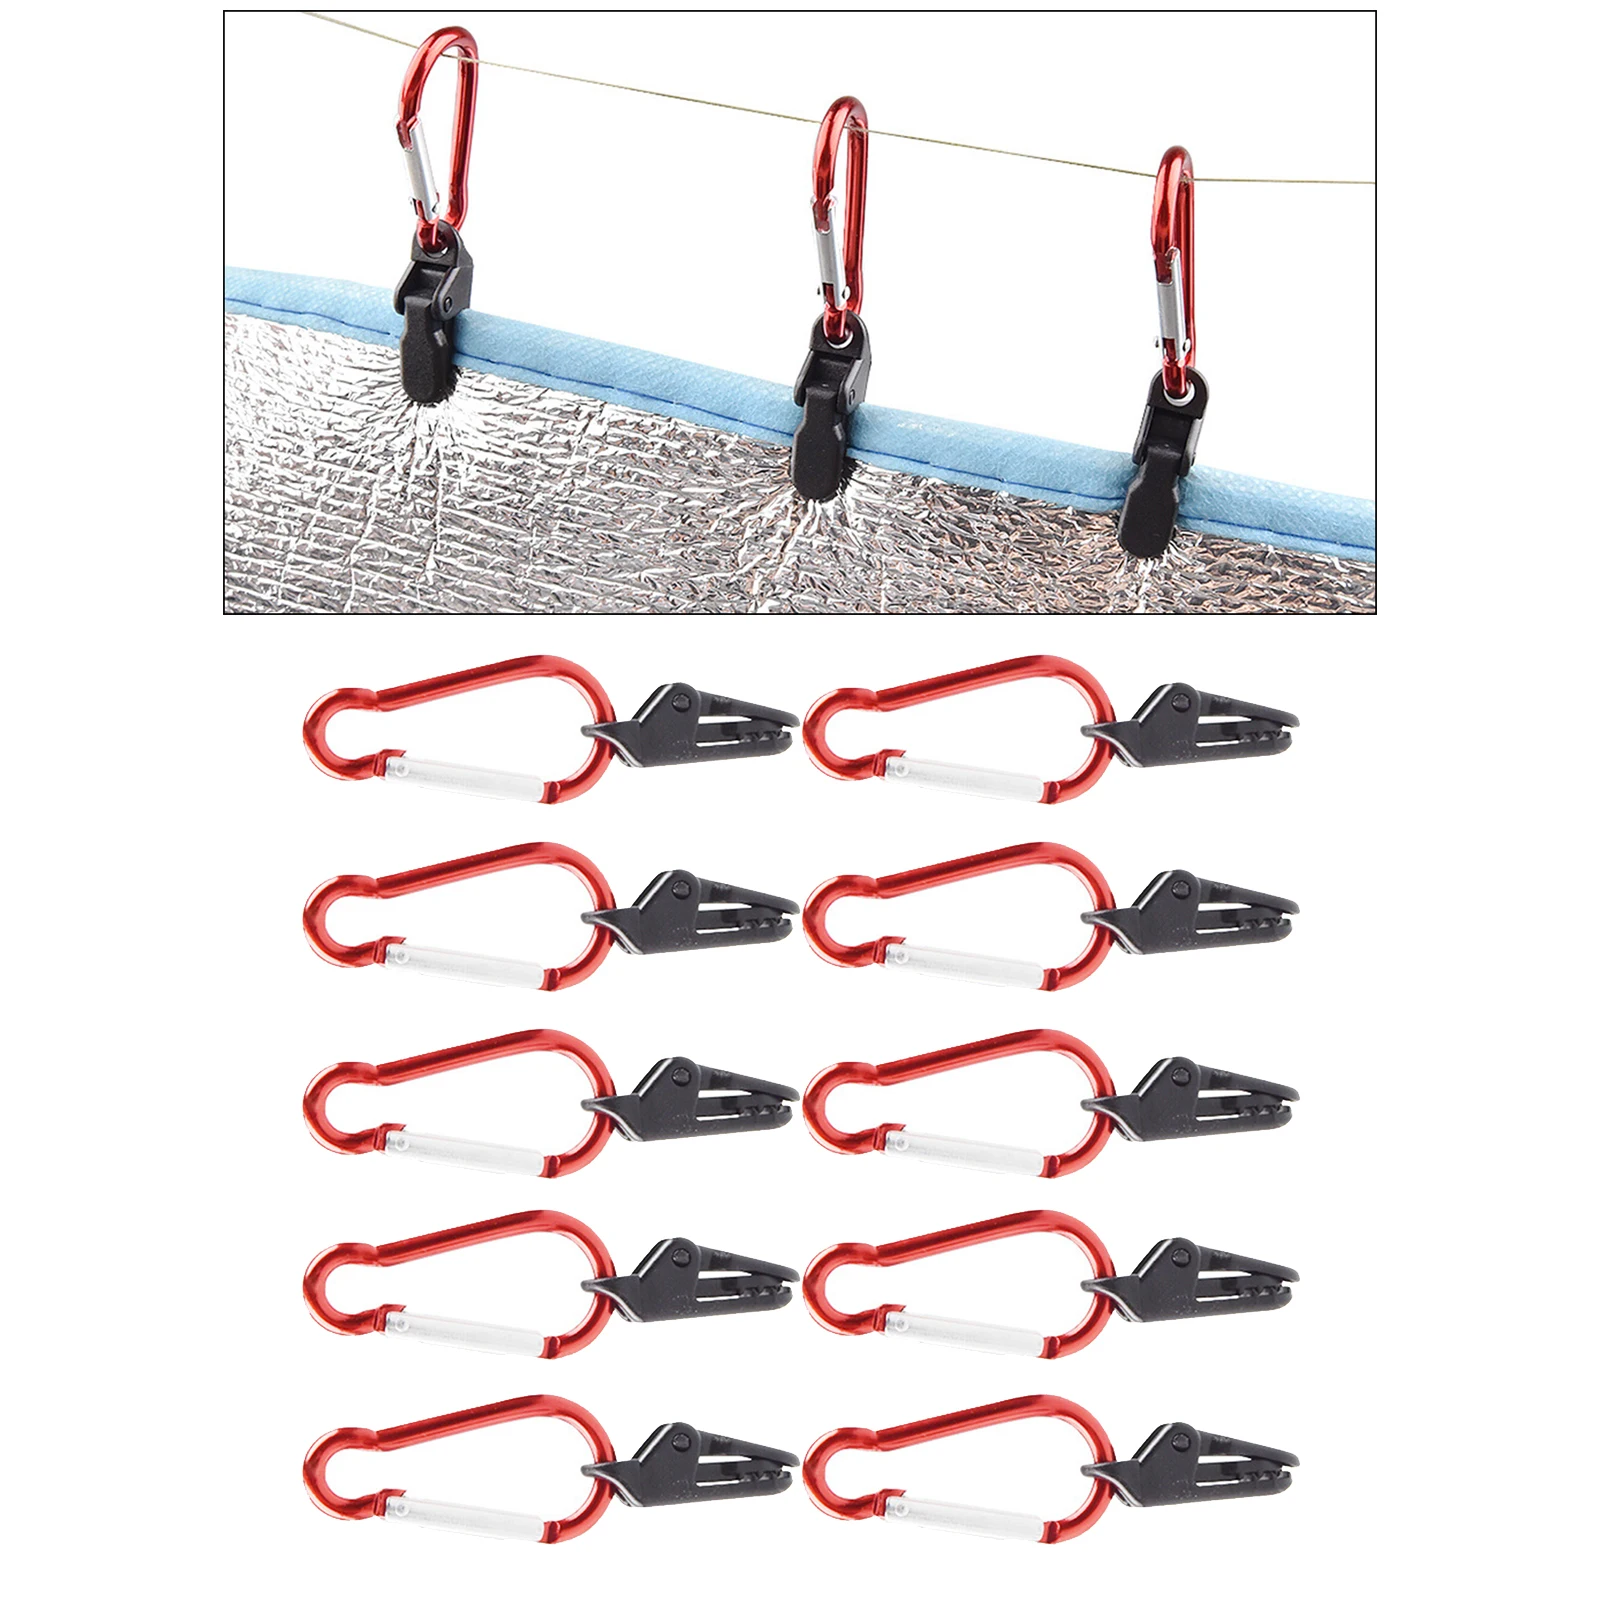 10x Tarp Clips Clamps Holding Up Canopy Alligator Mouth Lock Clip Carabiner